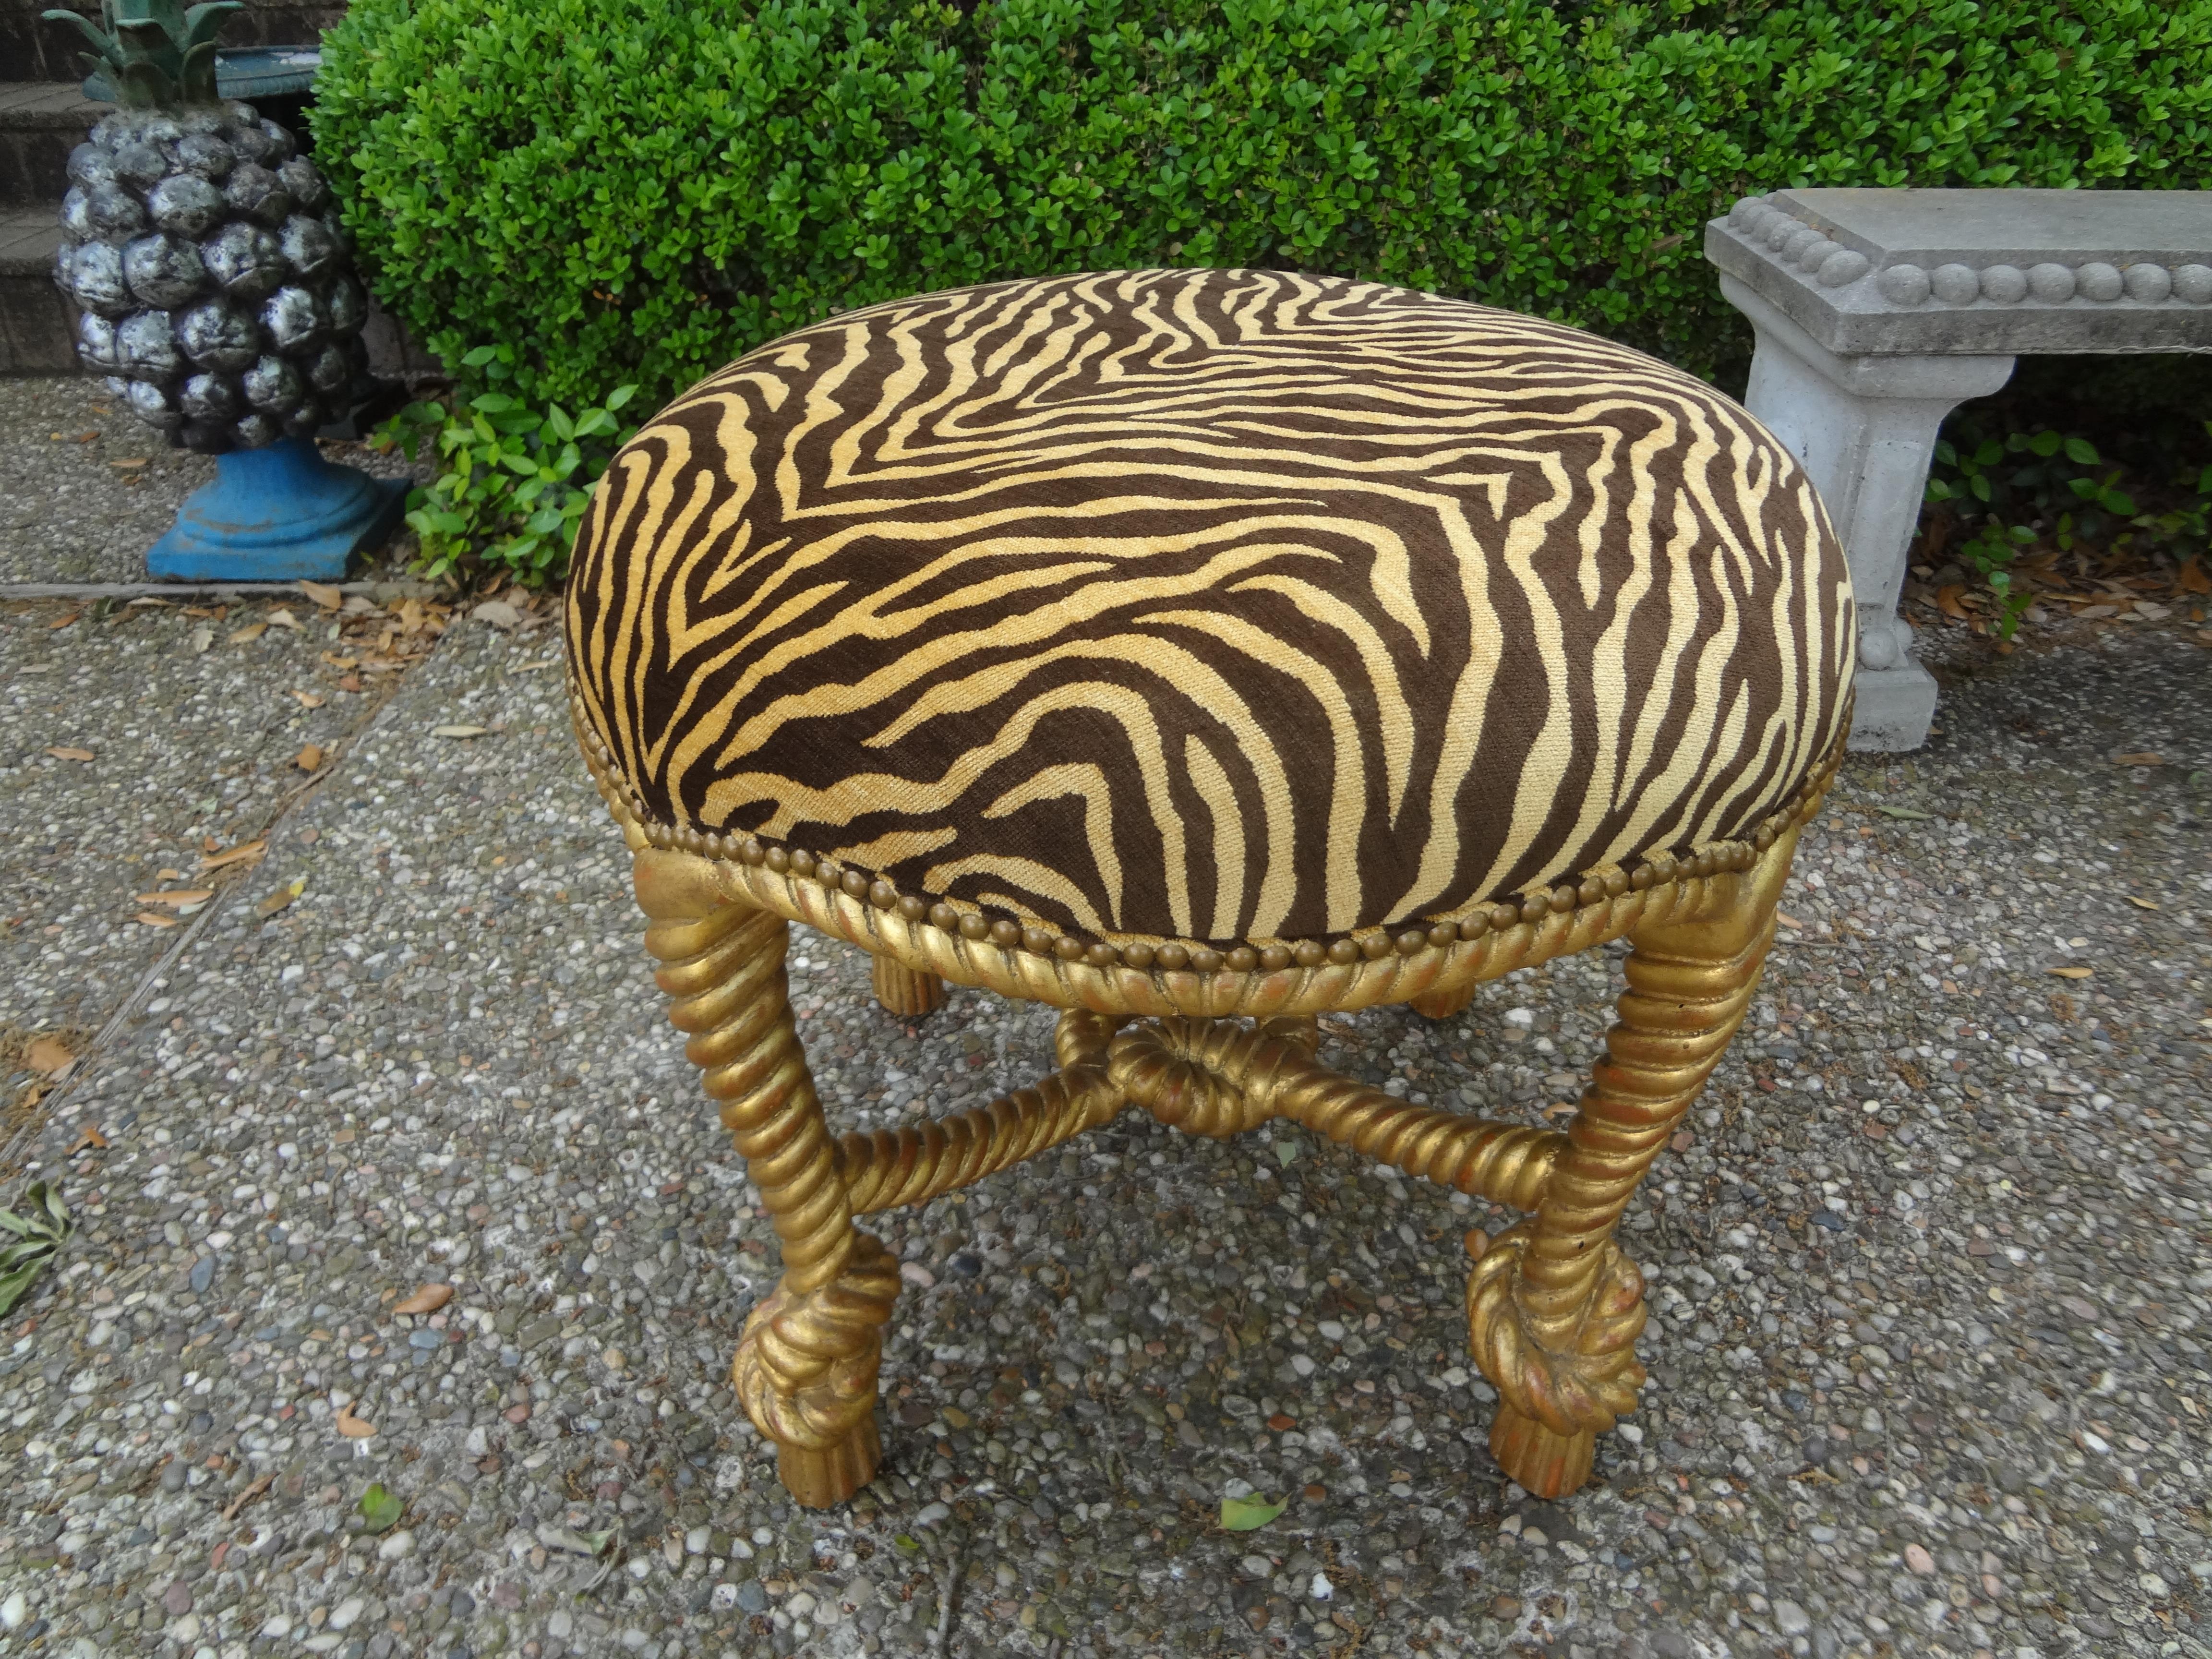 Stunning Italian A.M.E. Fournier style, Louis XVI style, or Napoleon III style carved giltwood knotted rope and tassel ottoman. This large and comfortable ottoman, stool, bench or tabouret is currently upholstered in tiger print velvet fabric with